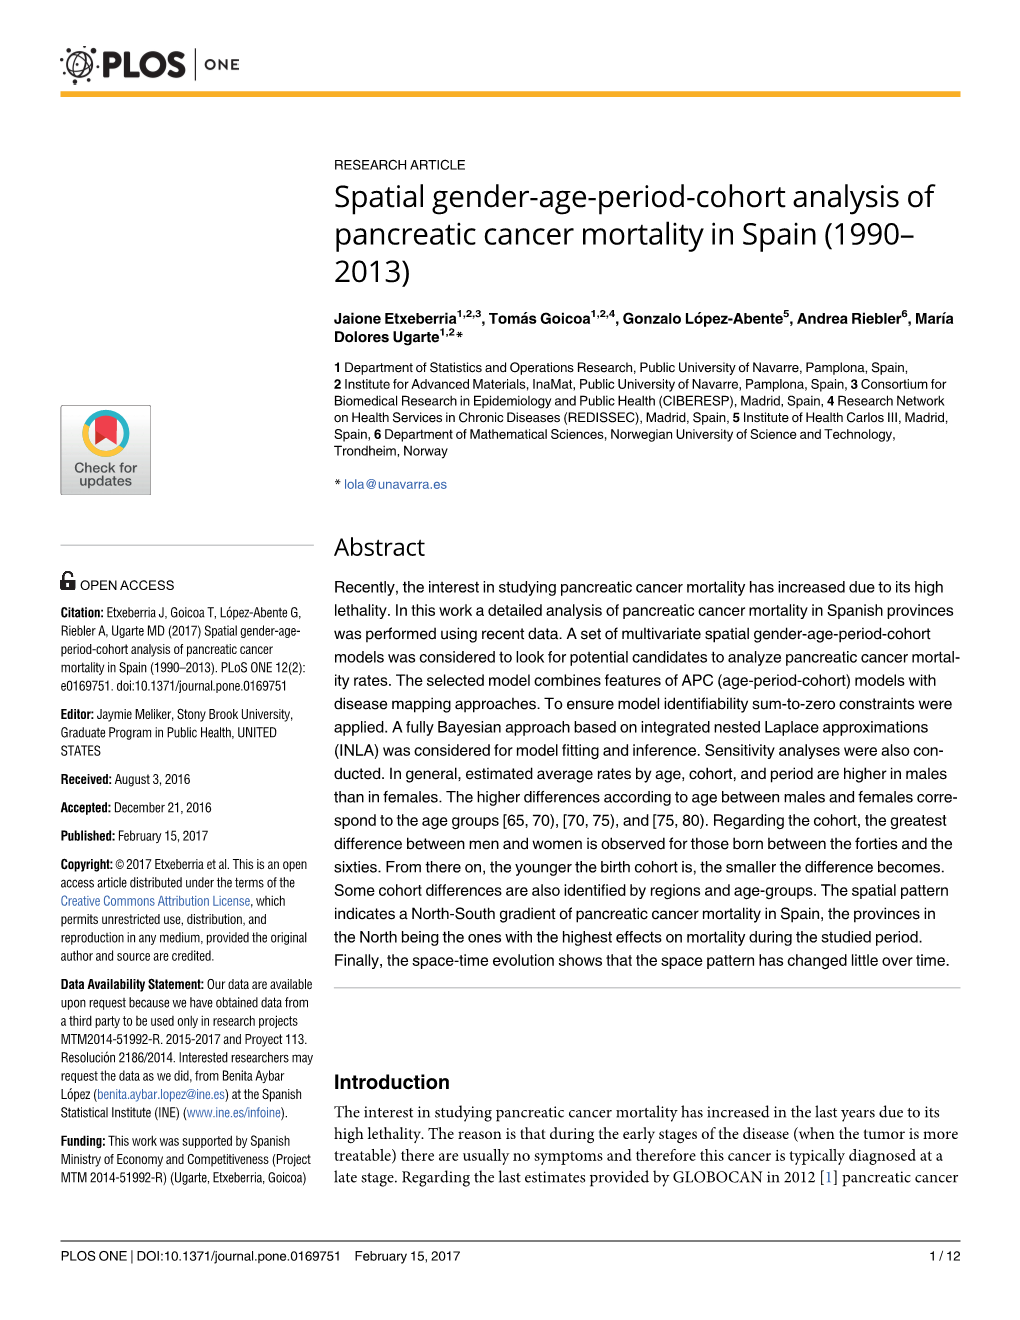 Spatial Gender-Age-Period-Cohort Analysis of Pancreatic Cancer Mortality in Spain (1990–2013)